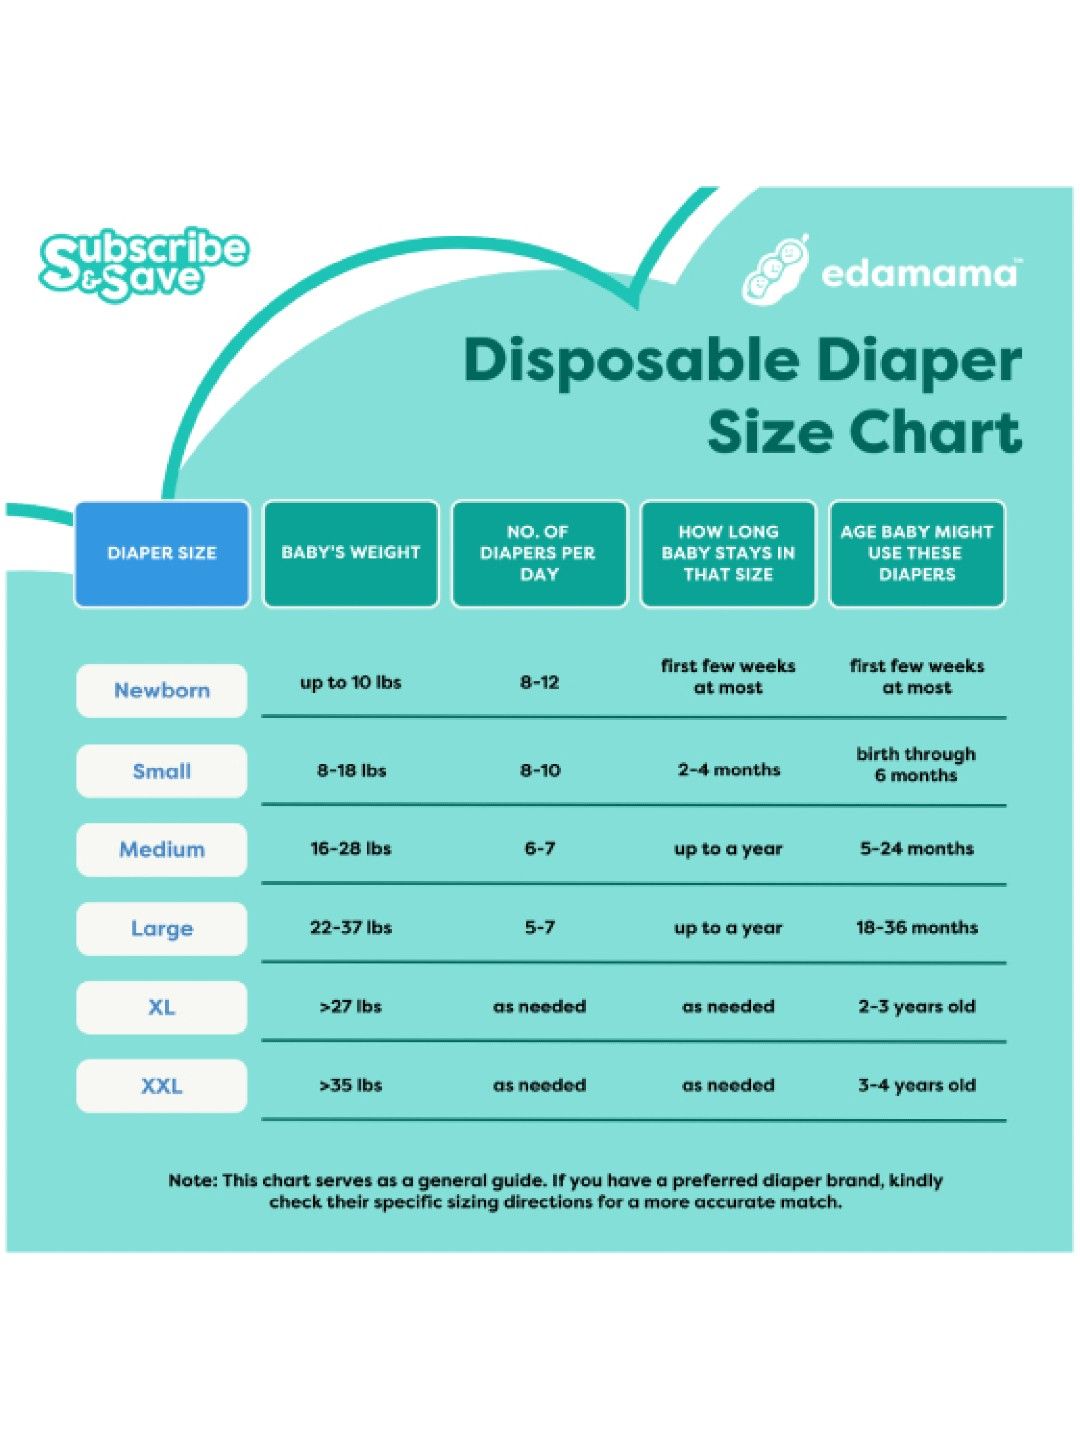 EQ Diapers and Wipes Plus Jumbo Pack Tape Diaper Large (42 pcs x 3 pack) - Subscription (No Color- Image 4)